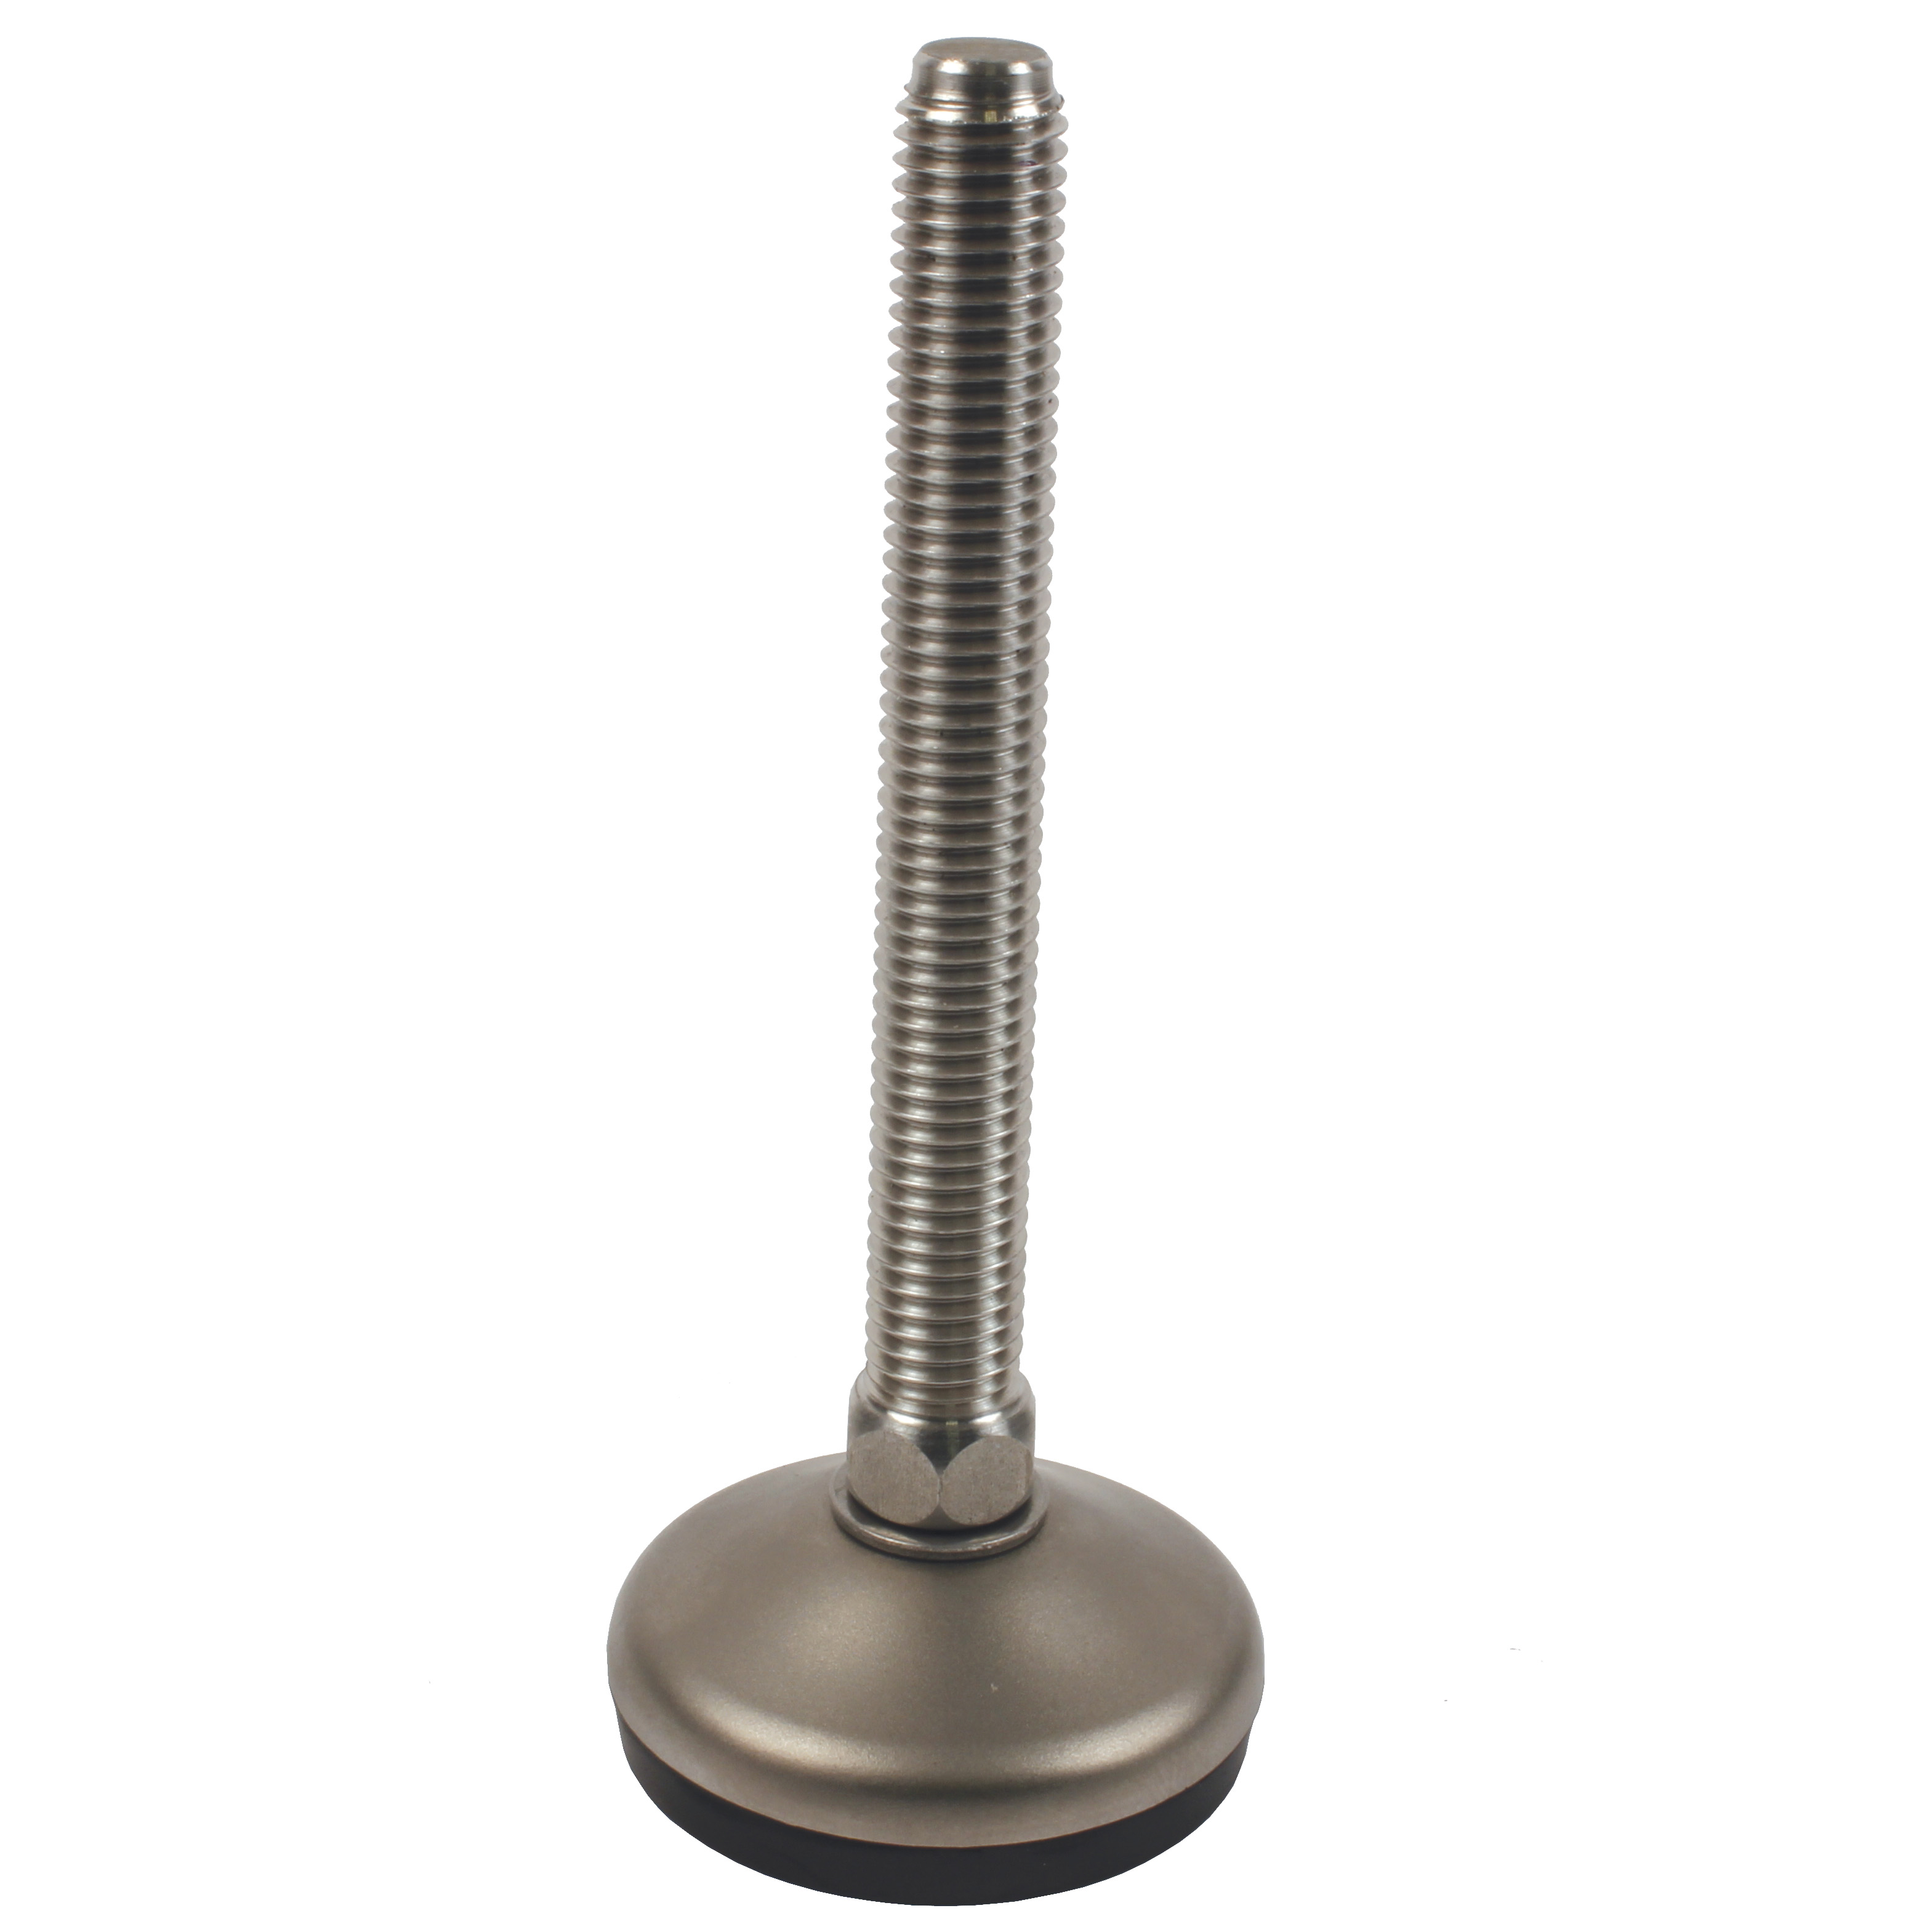 Articulated levelling foot, pressed base Ø80 - Ø 80 - Stainless steel - sanded finish - 